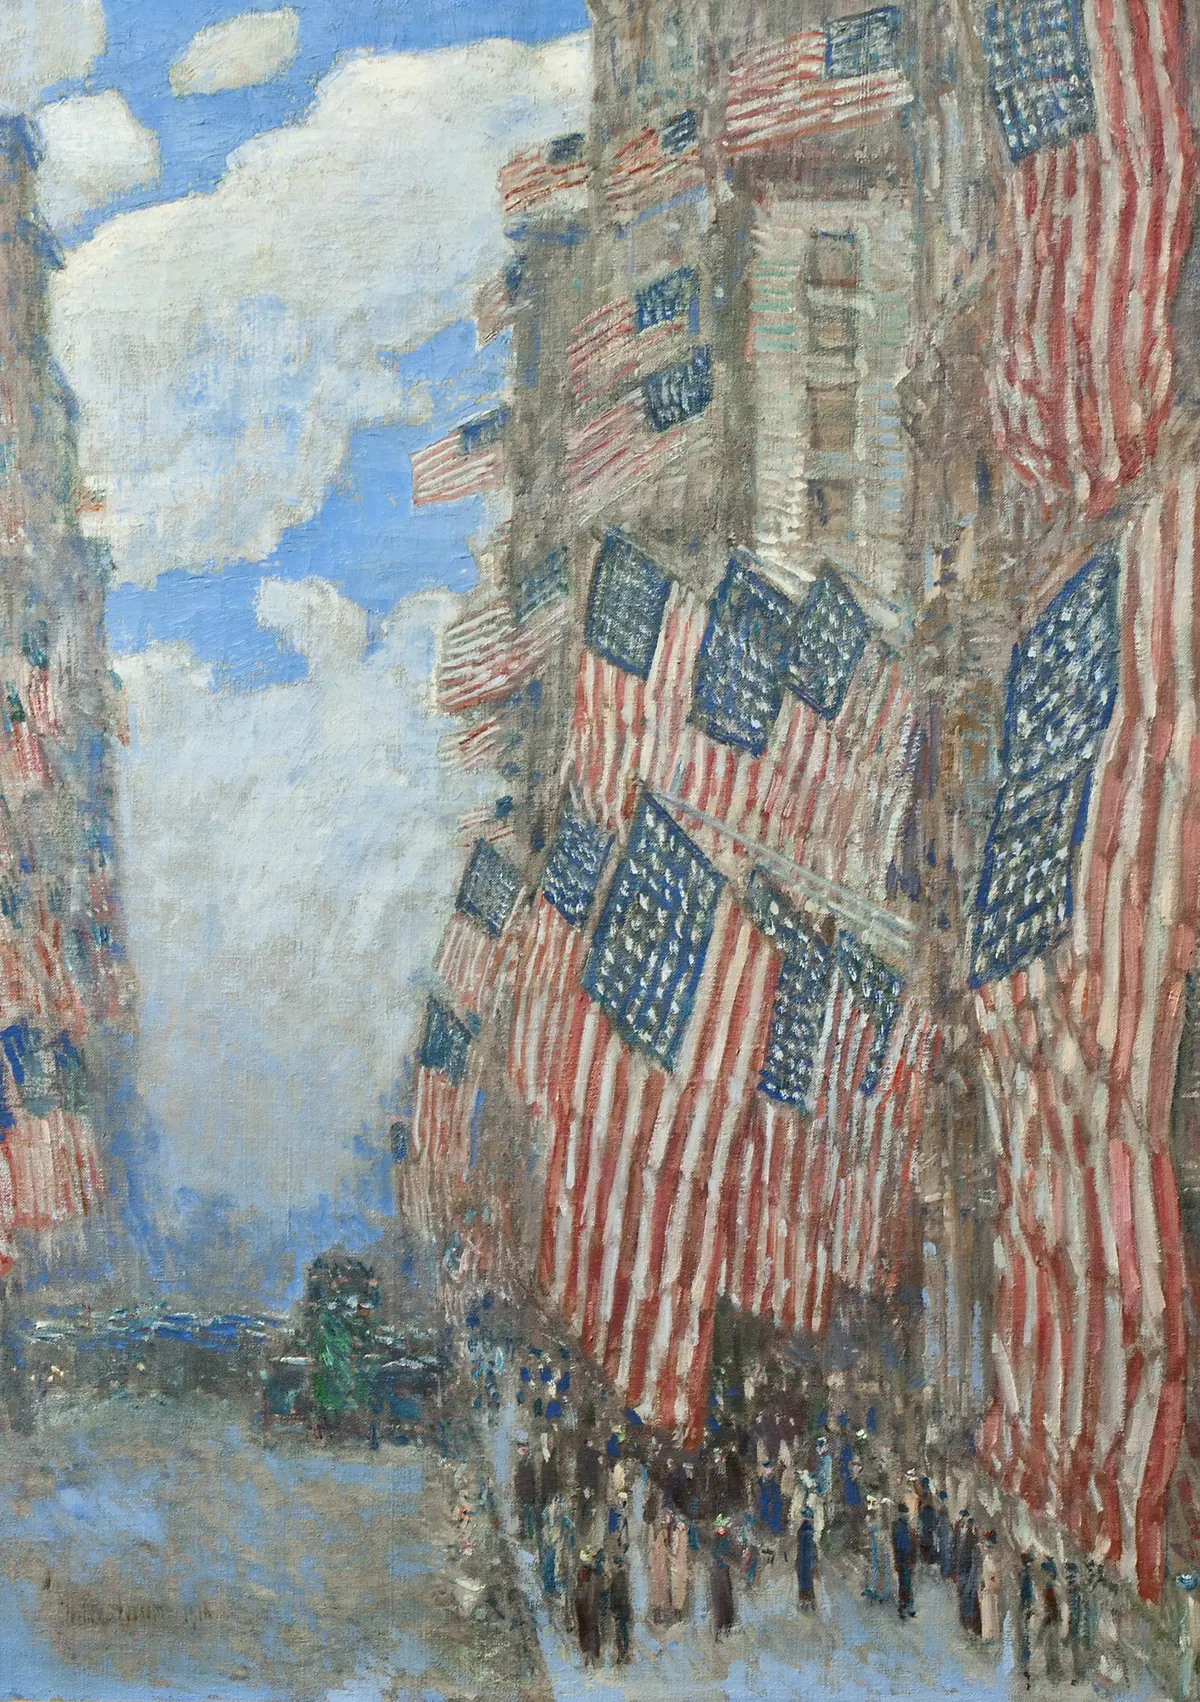 The Fourth of July, 1916 by Frederick Childe Hassam - 1916 - 91.4 × 66.7 cm New York Historical Society